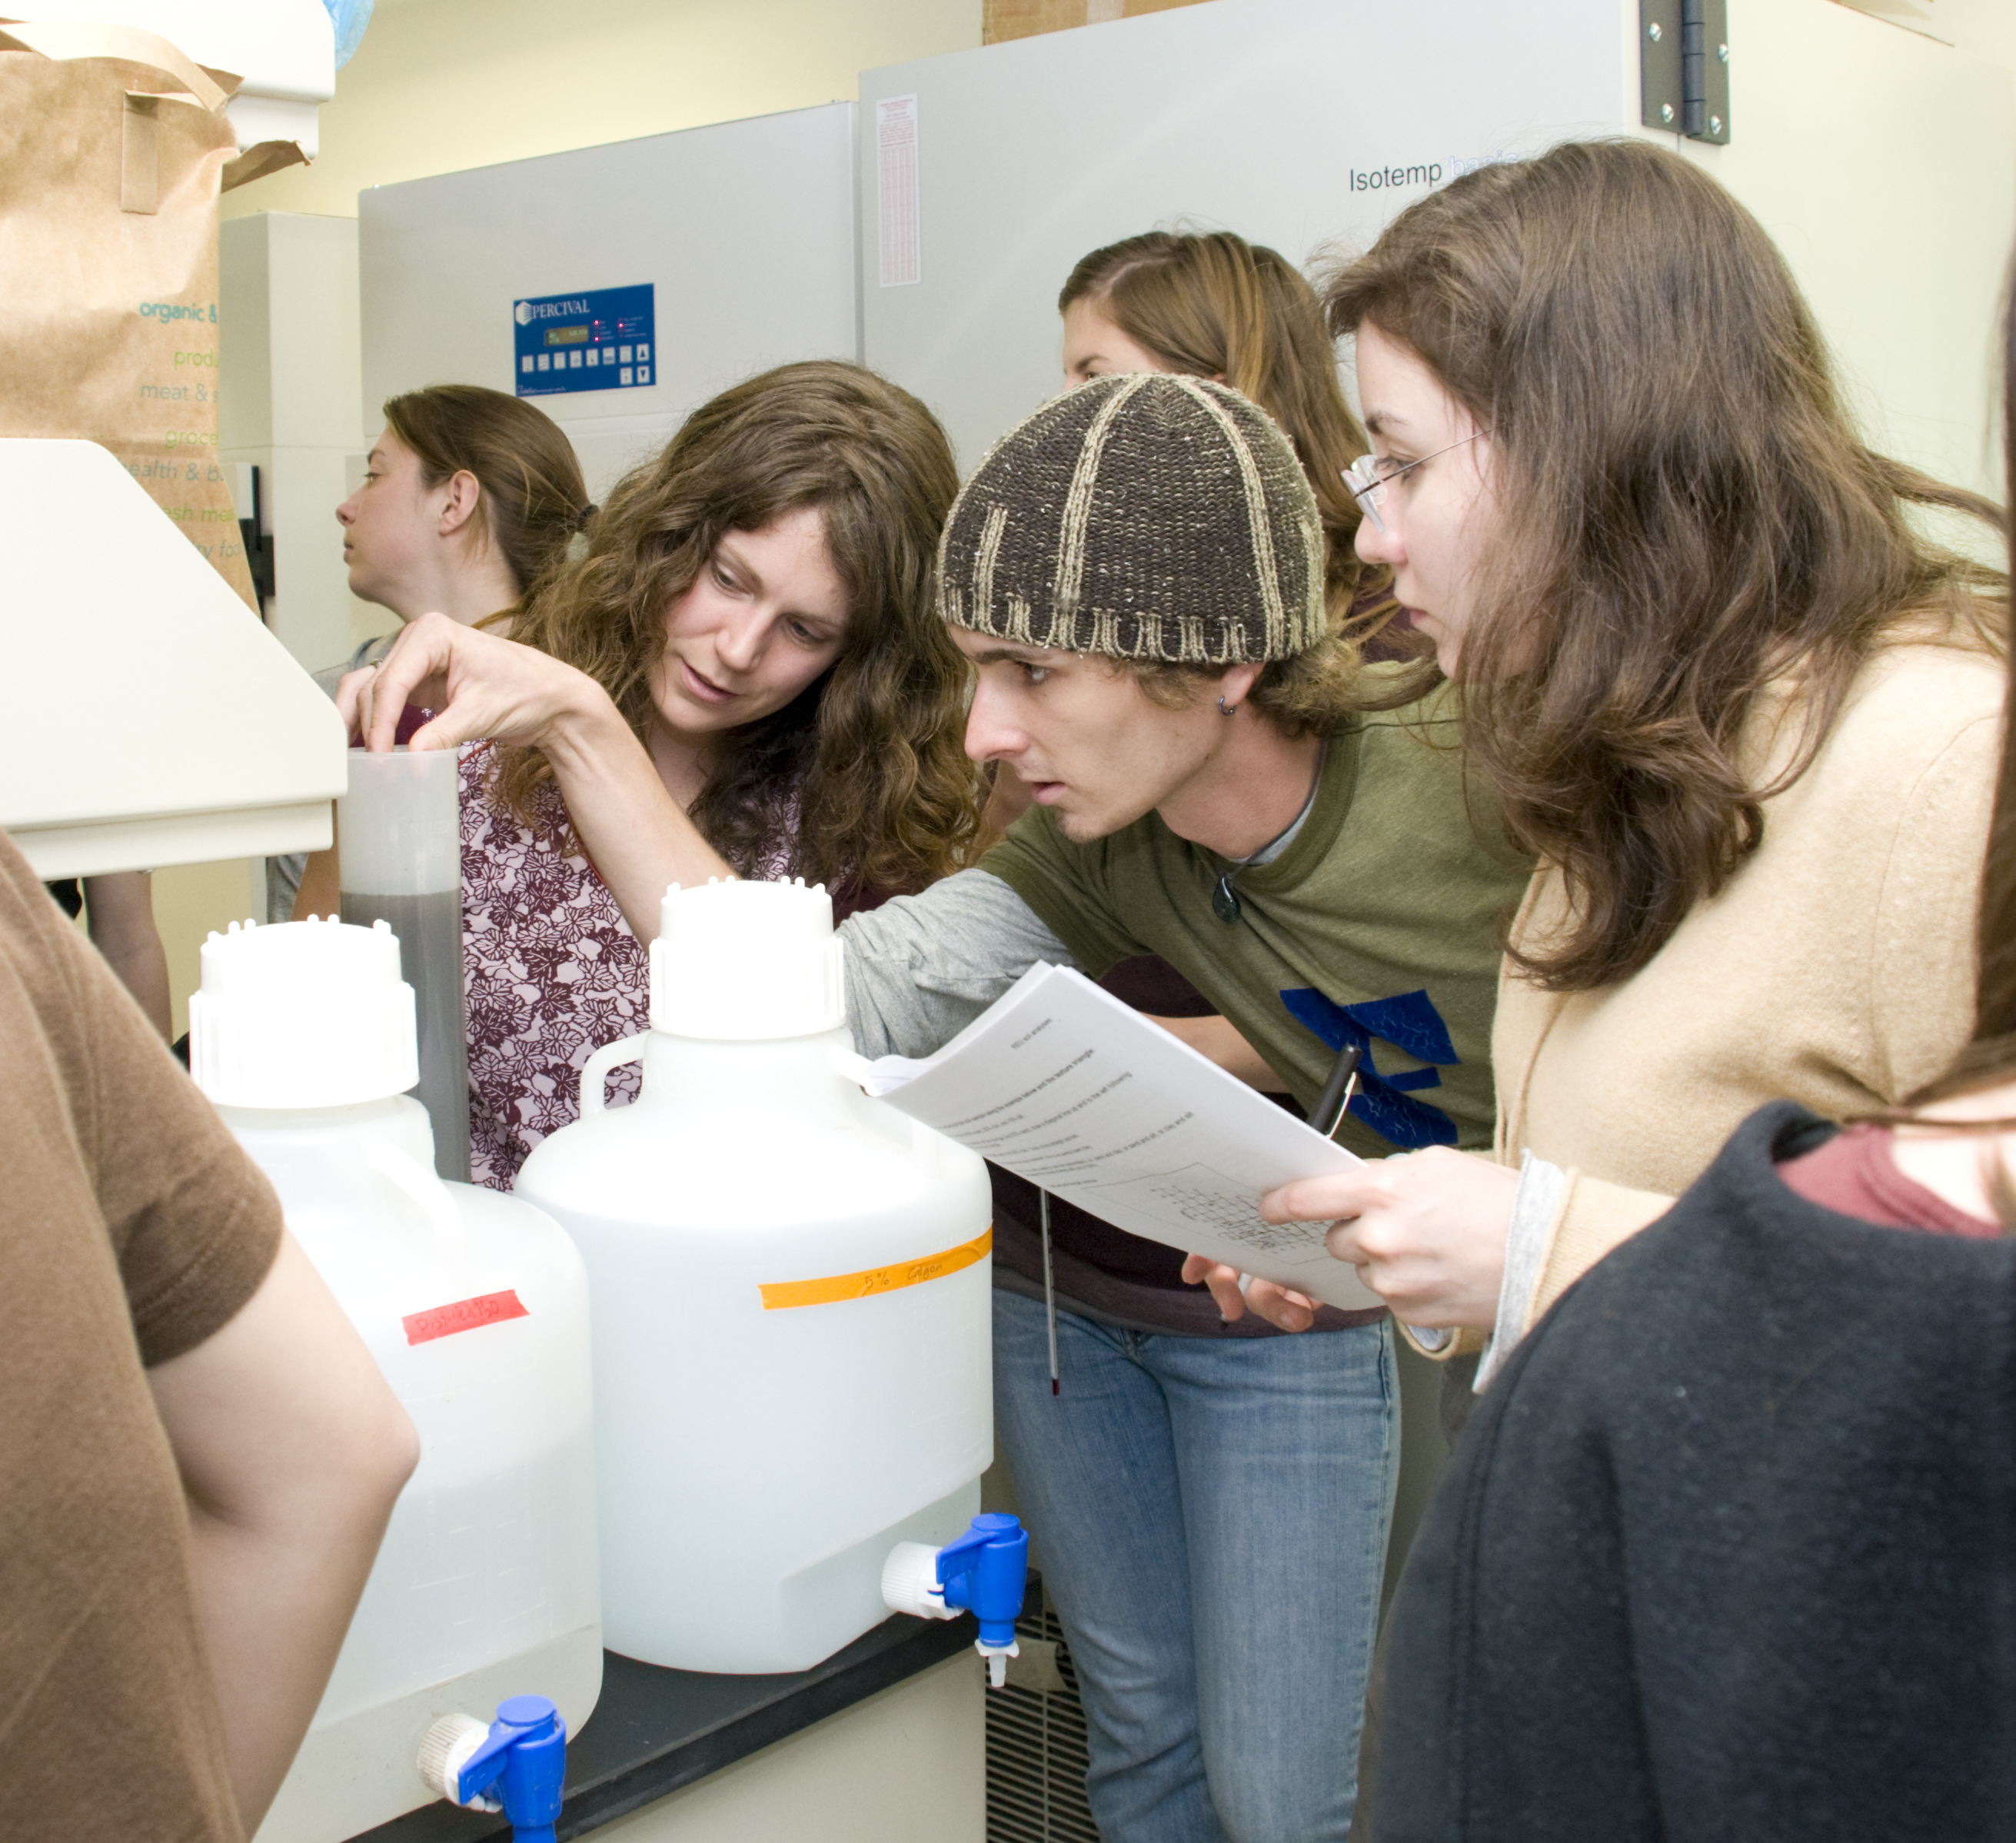 PHOTO: Bureau of Land Management interns at work in the labs.